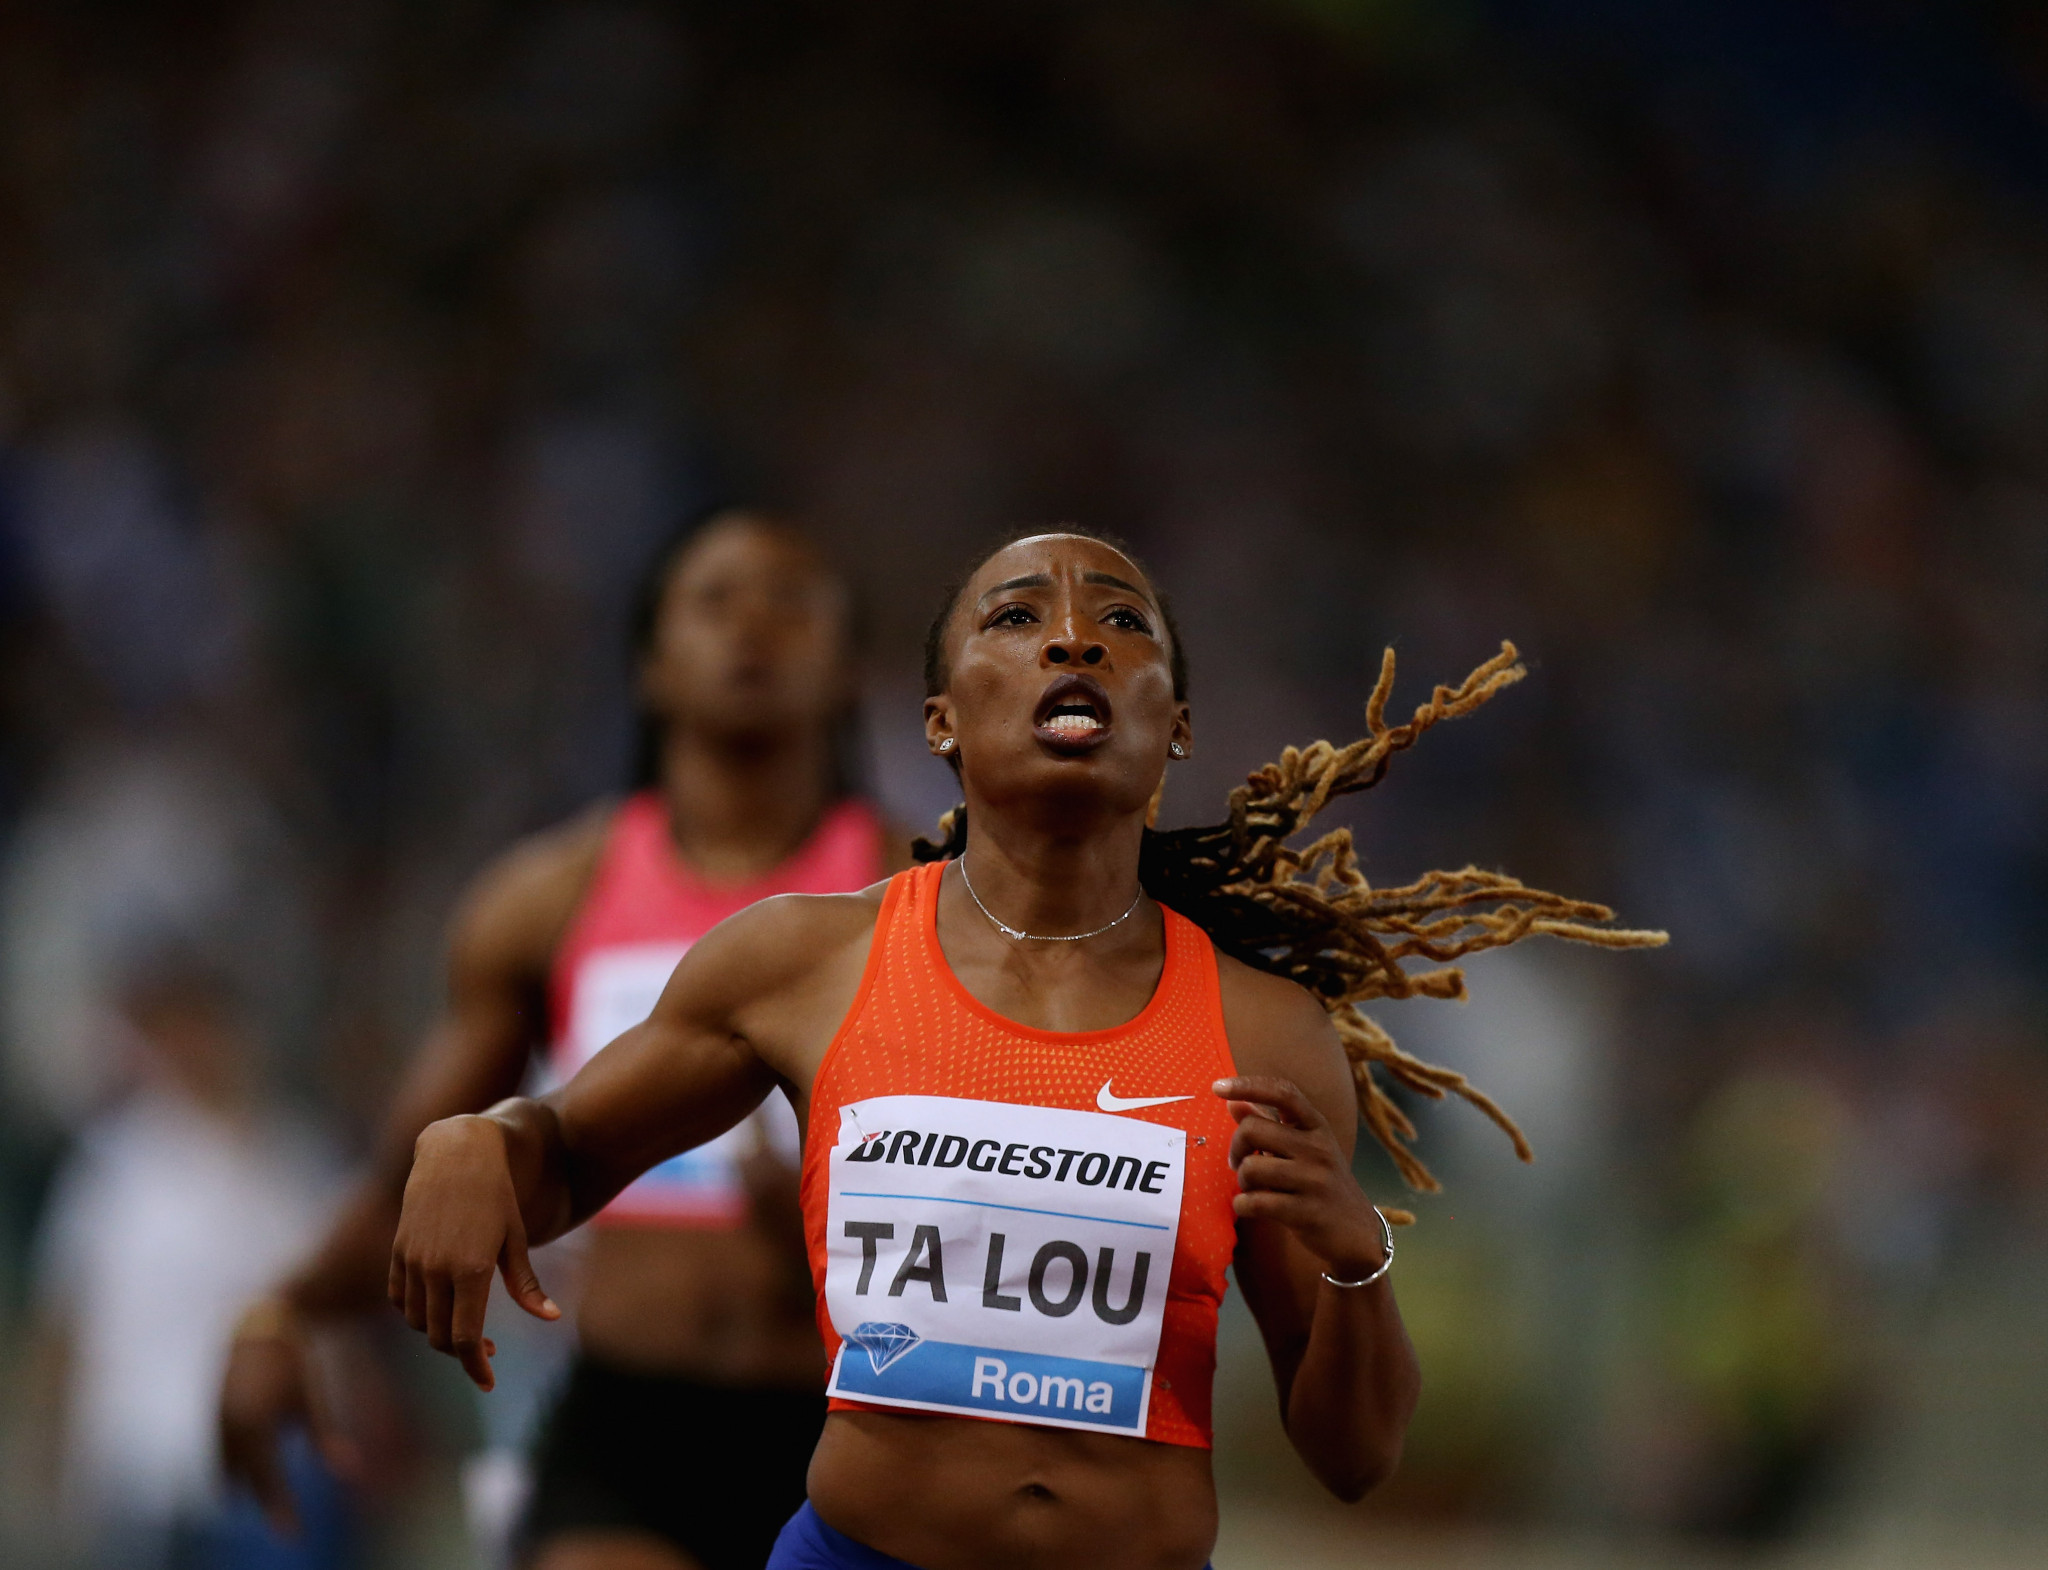 Ivory Coast's Marie-Josée Ta Lou, one of the most decorated athletes in African Athletics Championships history, was set to defend her 100 metre and 200m titles in Algiers ©Getty Images